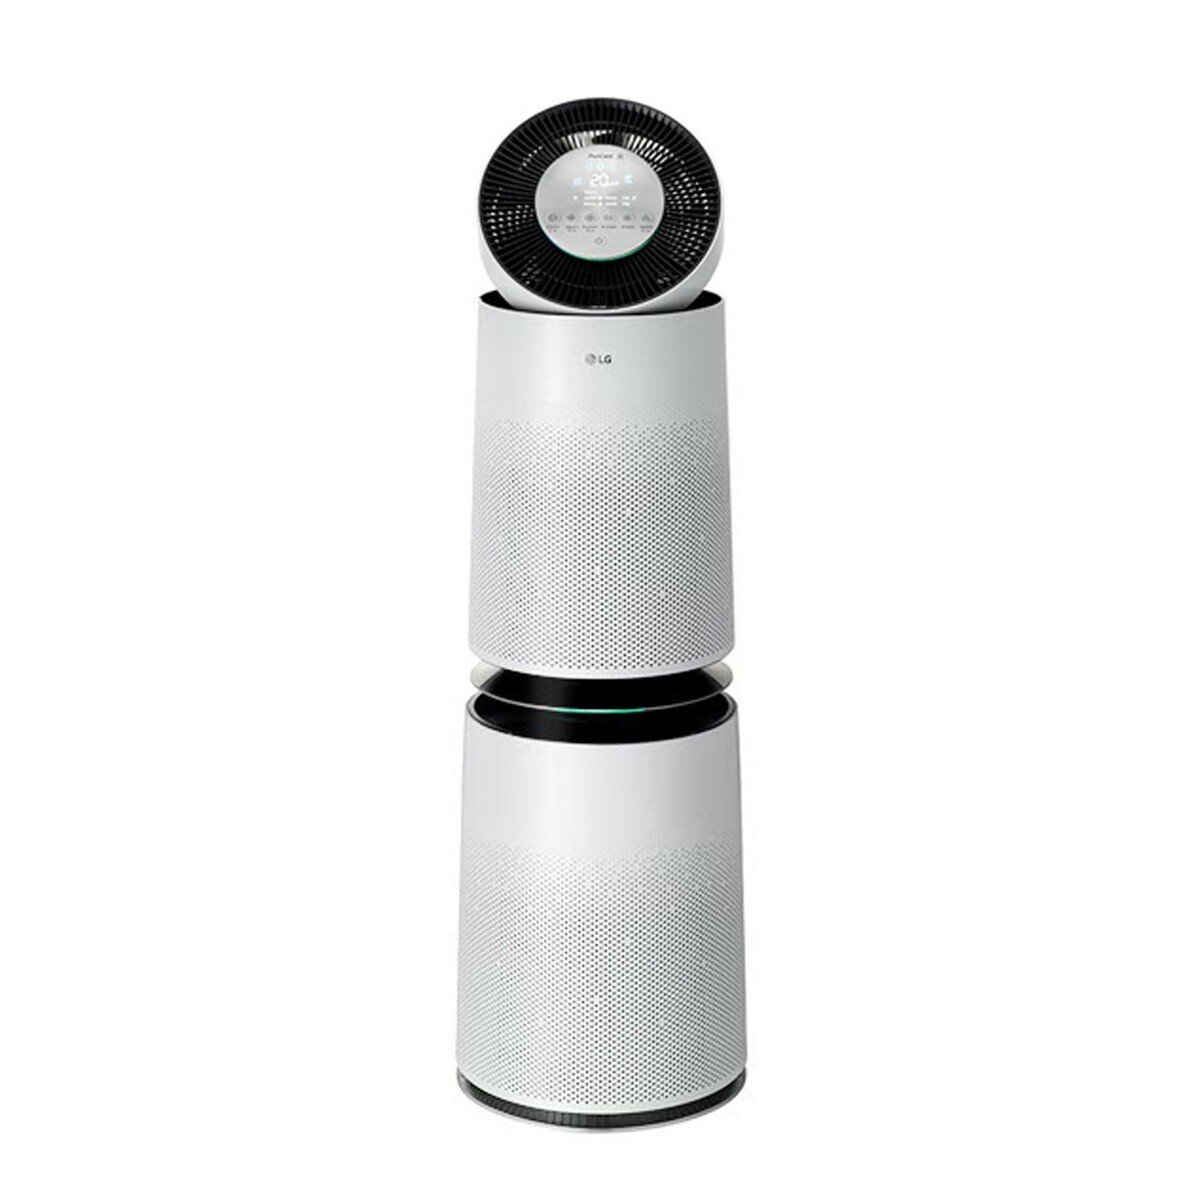 LG Air Purifier AS95GDWV0, 360º Purification, Clean Booster, Baby Care